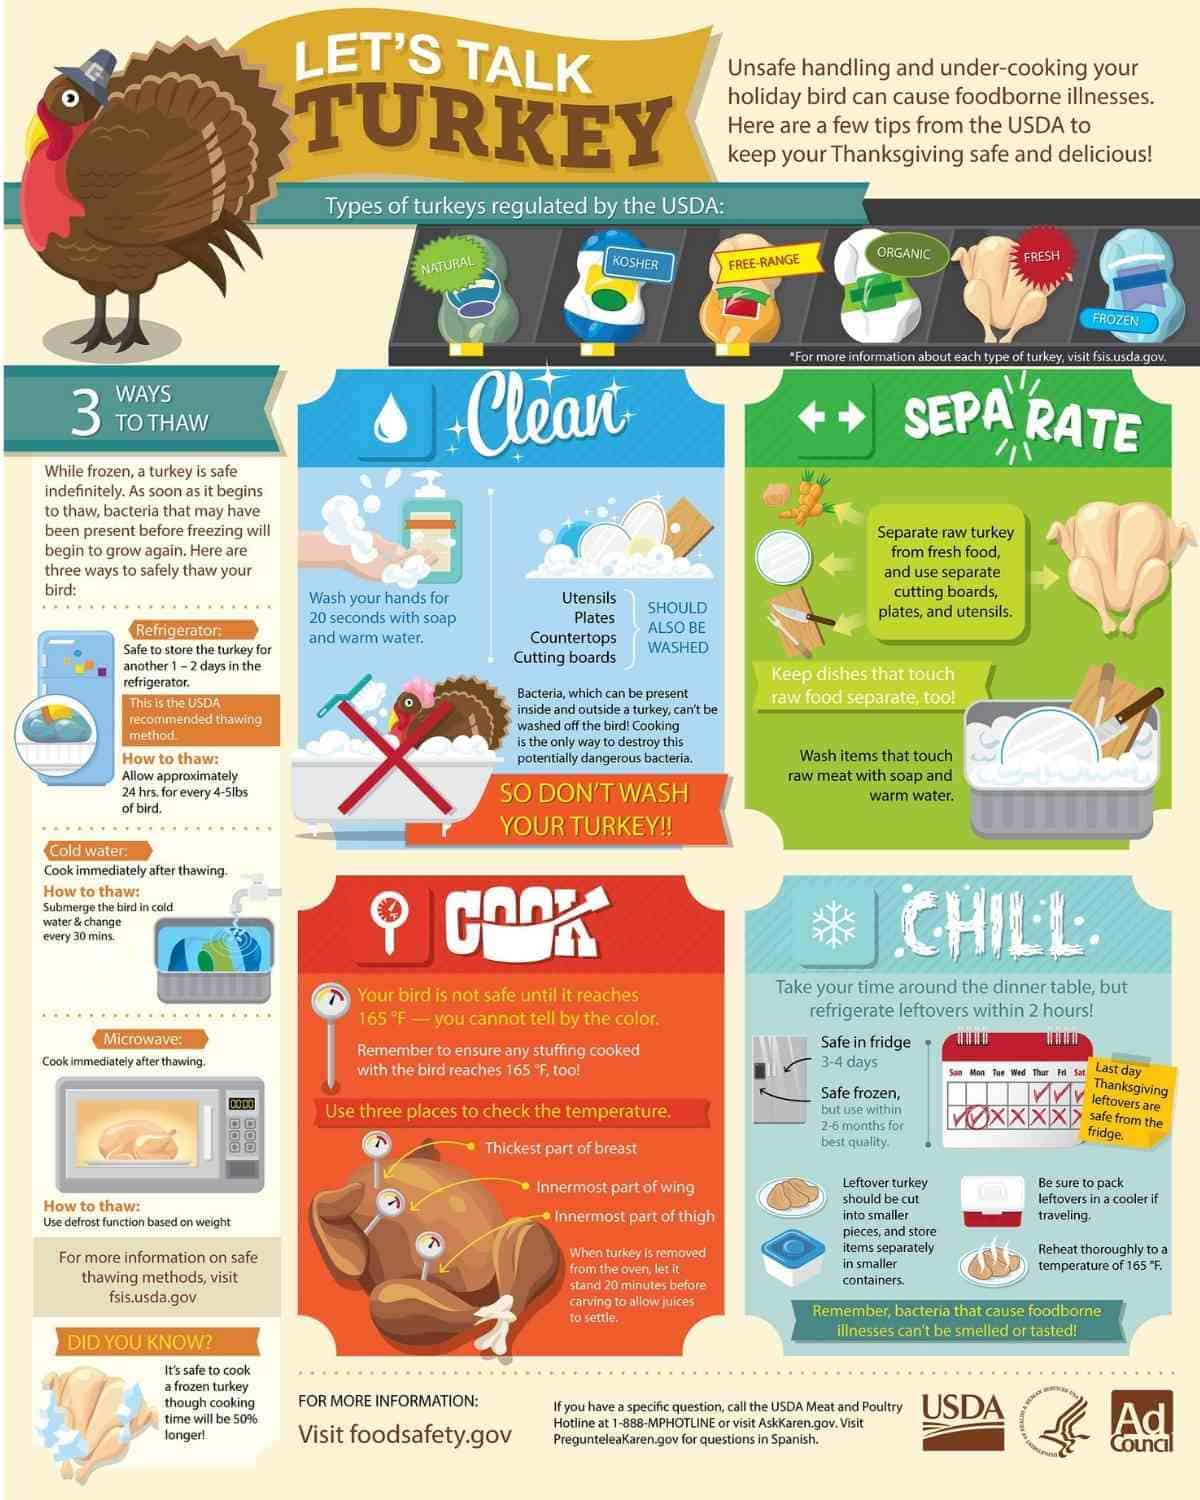 Food safety sheet for turkey from food safety.gov.